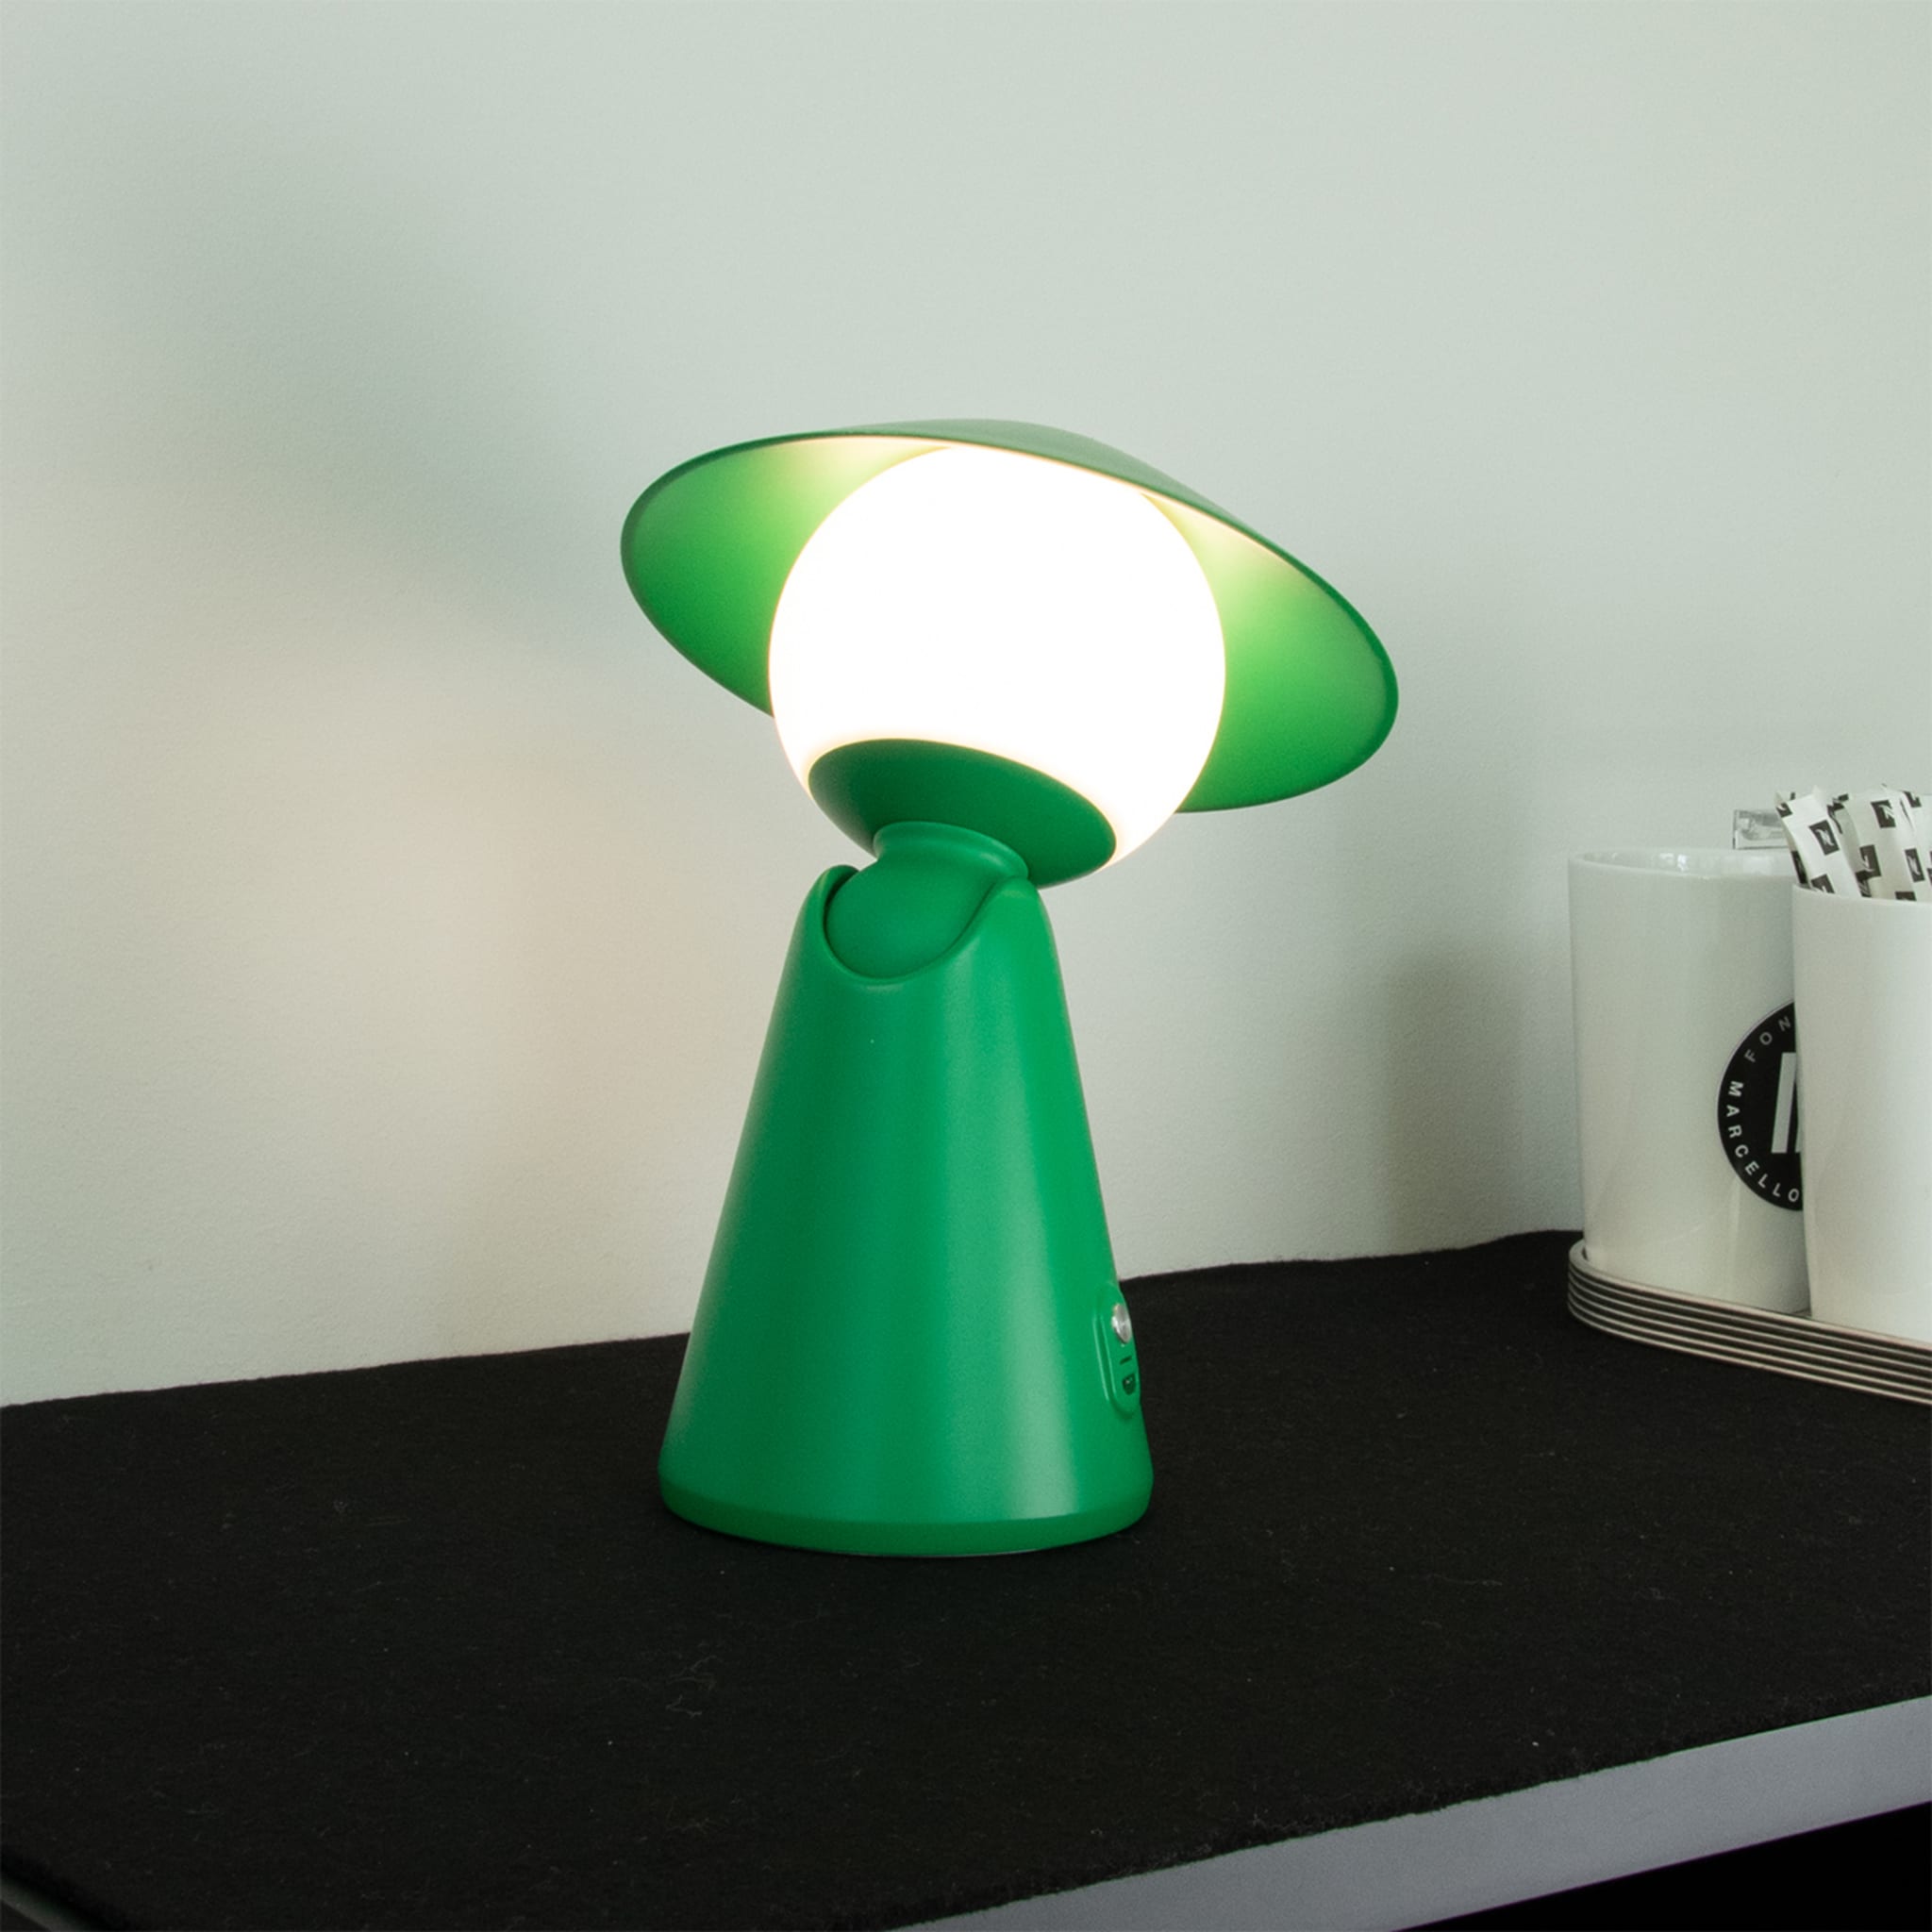 Puddy Green Rechargeable Table Lamp by Albore Design - Alternative view 1